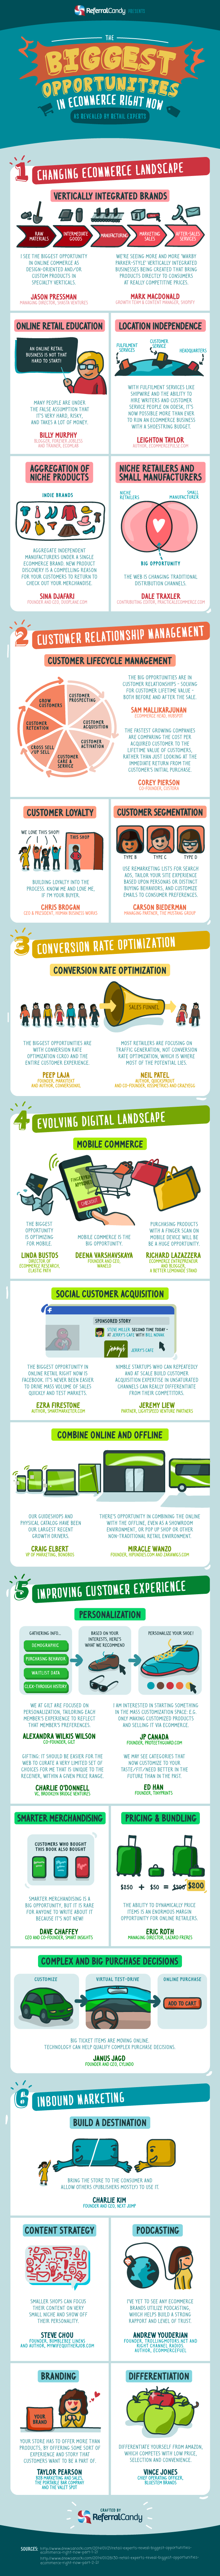 biggest-opportunities-ecommerce-infographic-590